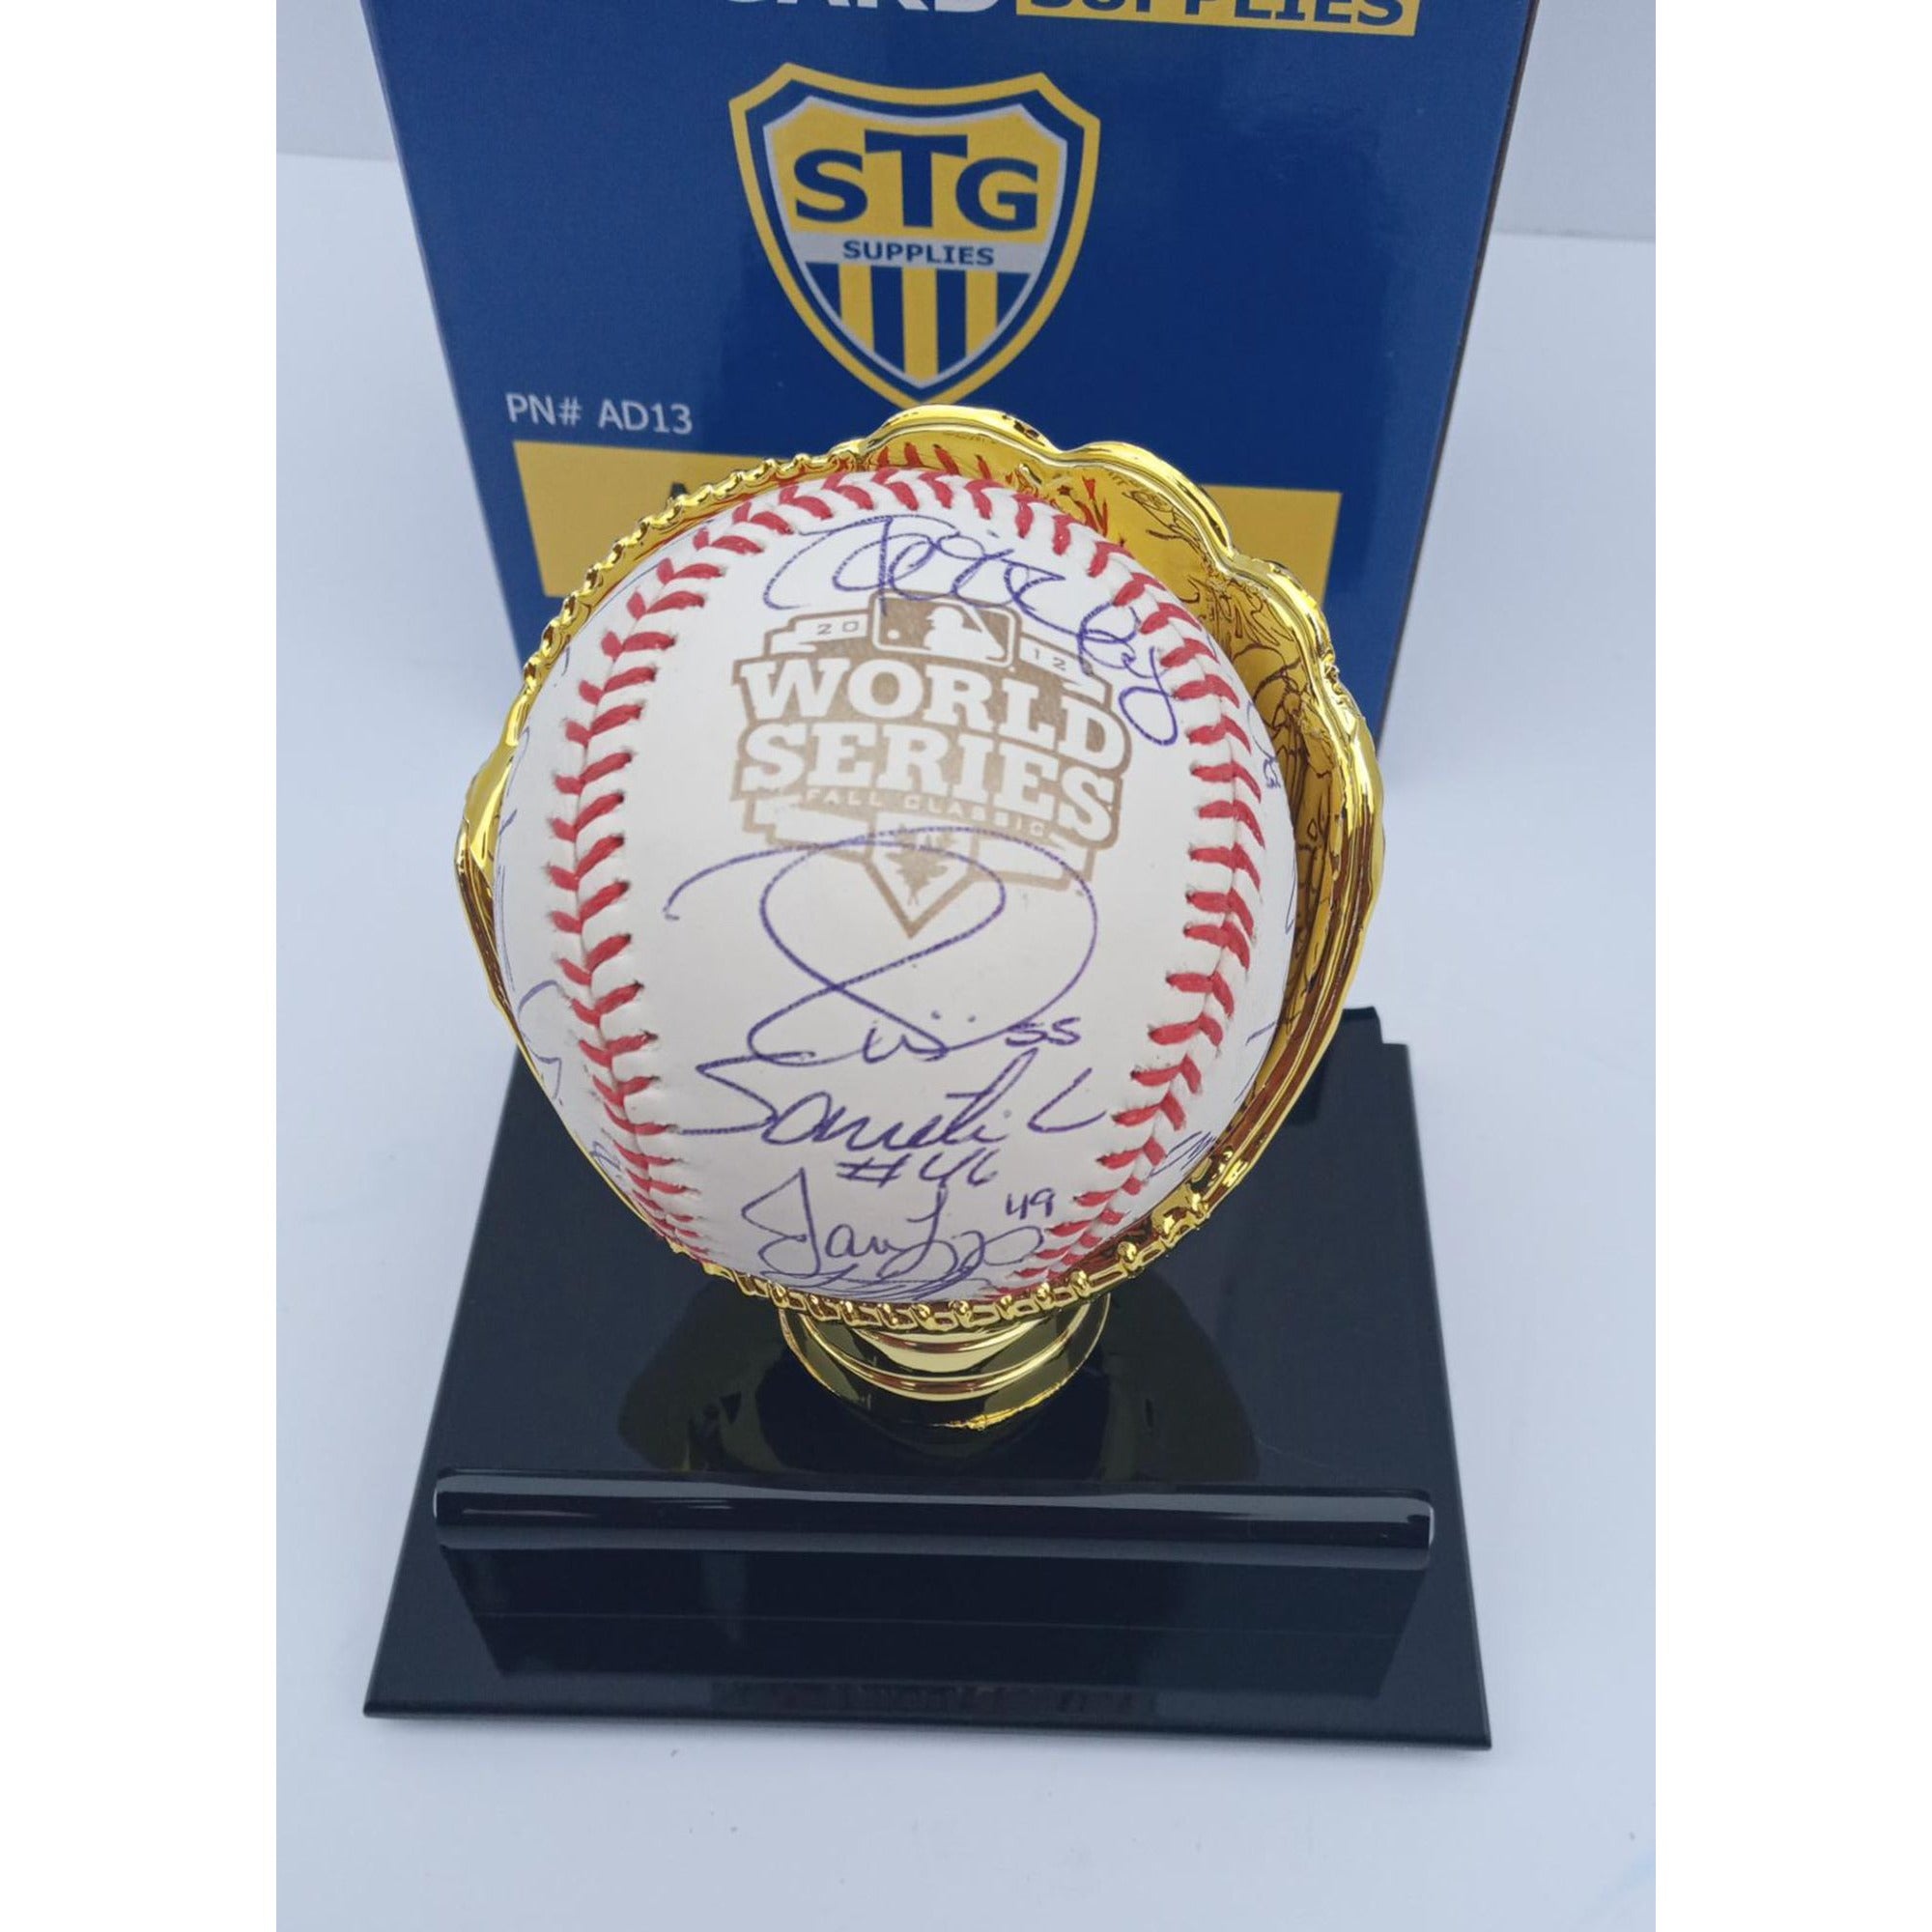 Buster Posey, Madison Bumgarner, 2012 San Francisco Giants World Champs team signed baseball with proof